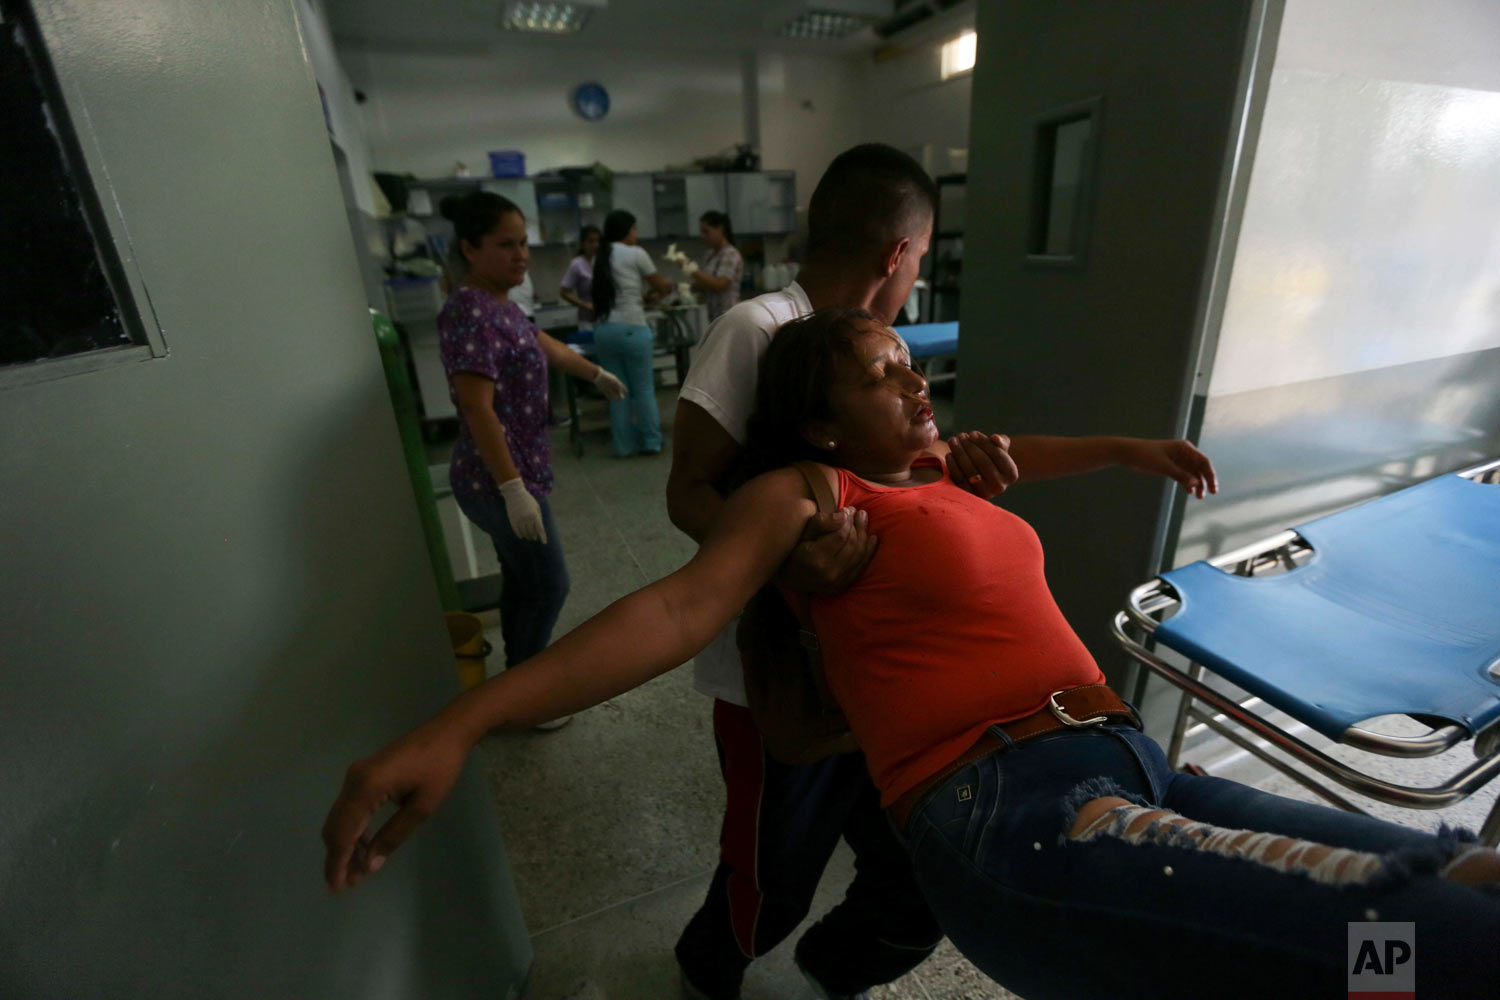  Joyce Brito is tended to by emergency room personnel after she was wounded in the chin during clashes with the Venezuelan Bolivarian National Guard in Urena, Venezuela, near the border with Colombia, Saturday, Feb. 23, 2019. (AP Photo/Fernando Llano